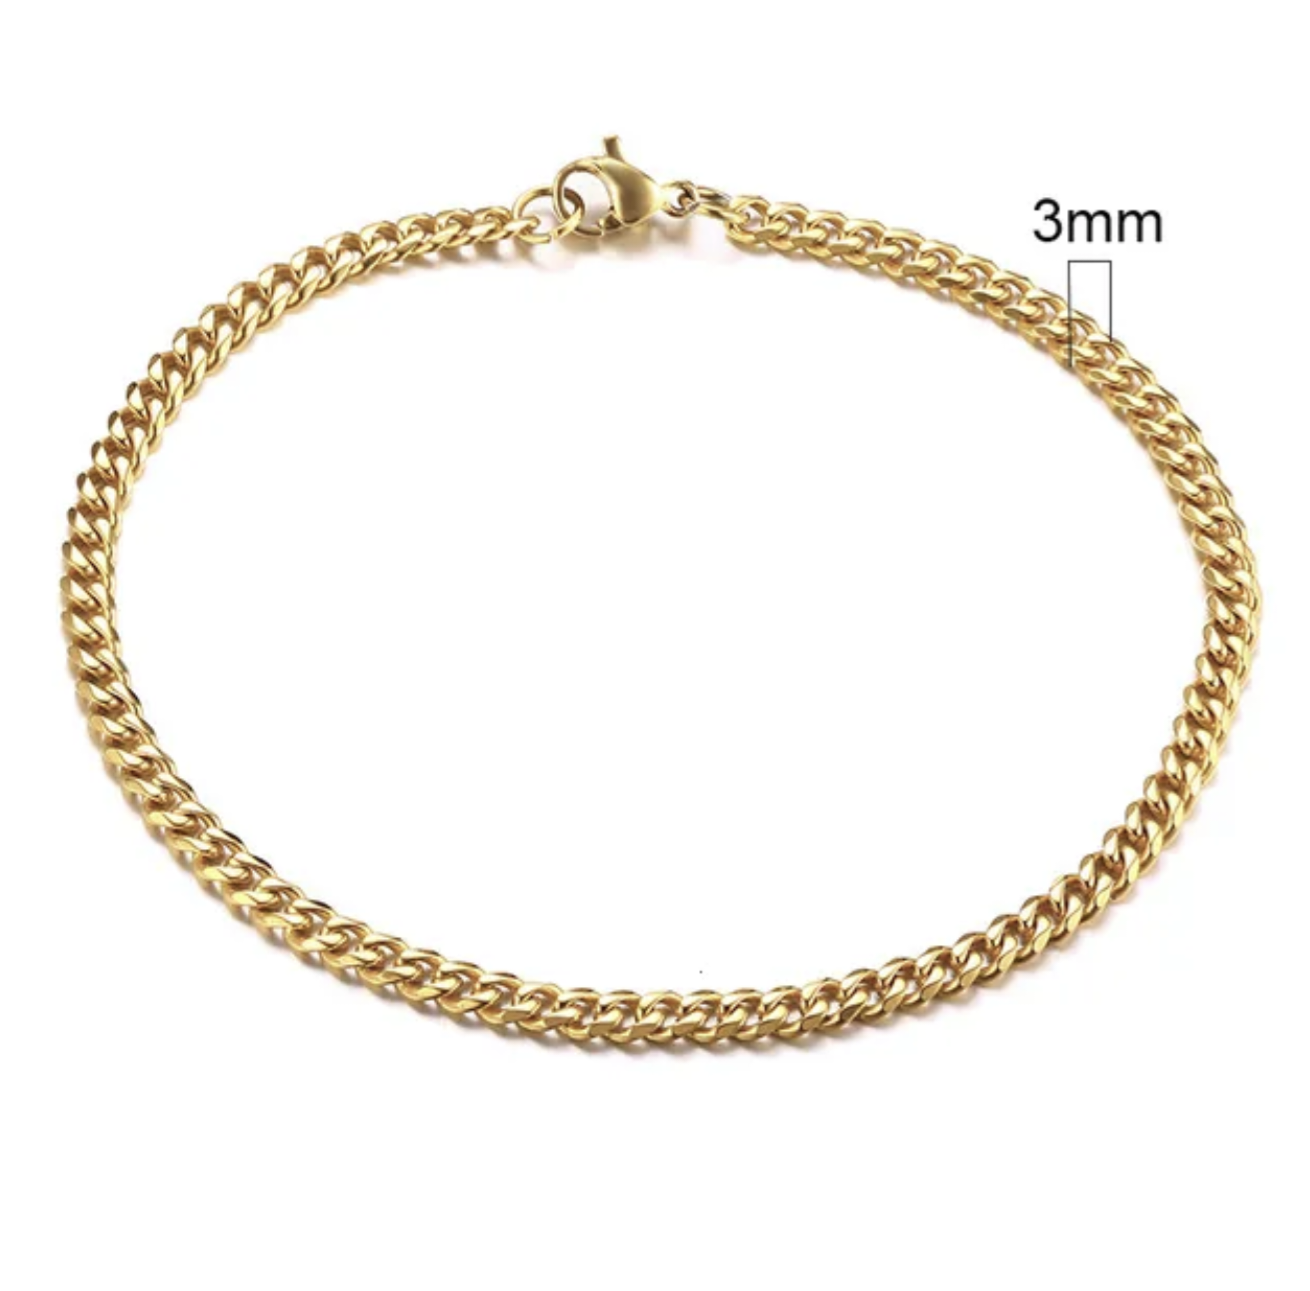 LIYANNAH - Cuban Chain Link Stainless Steel Anklet - 3mm / 5mm / 7mm -  Jewellery Everyday Essentials - Womens Gifts - For Her